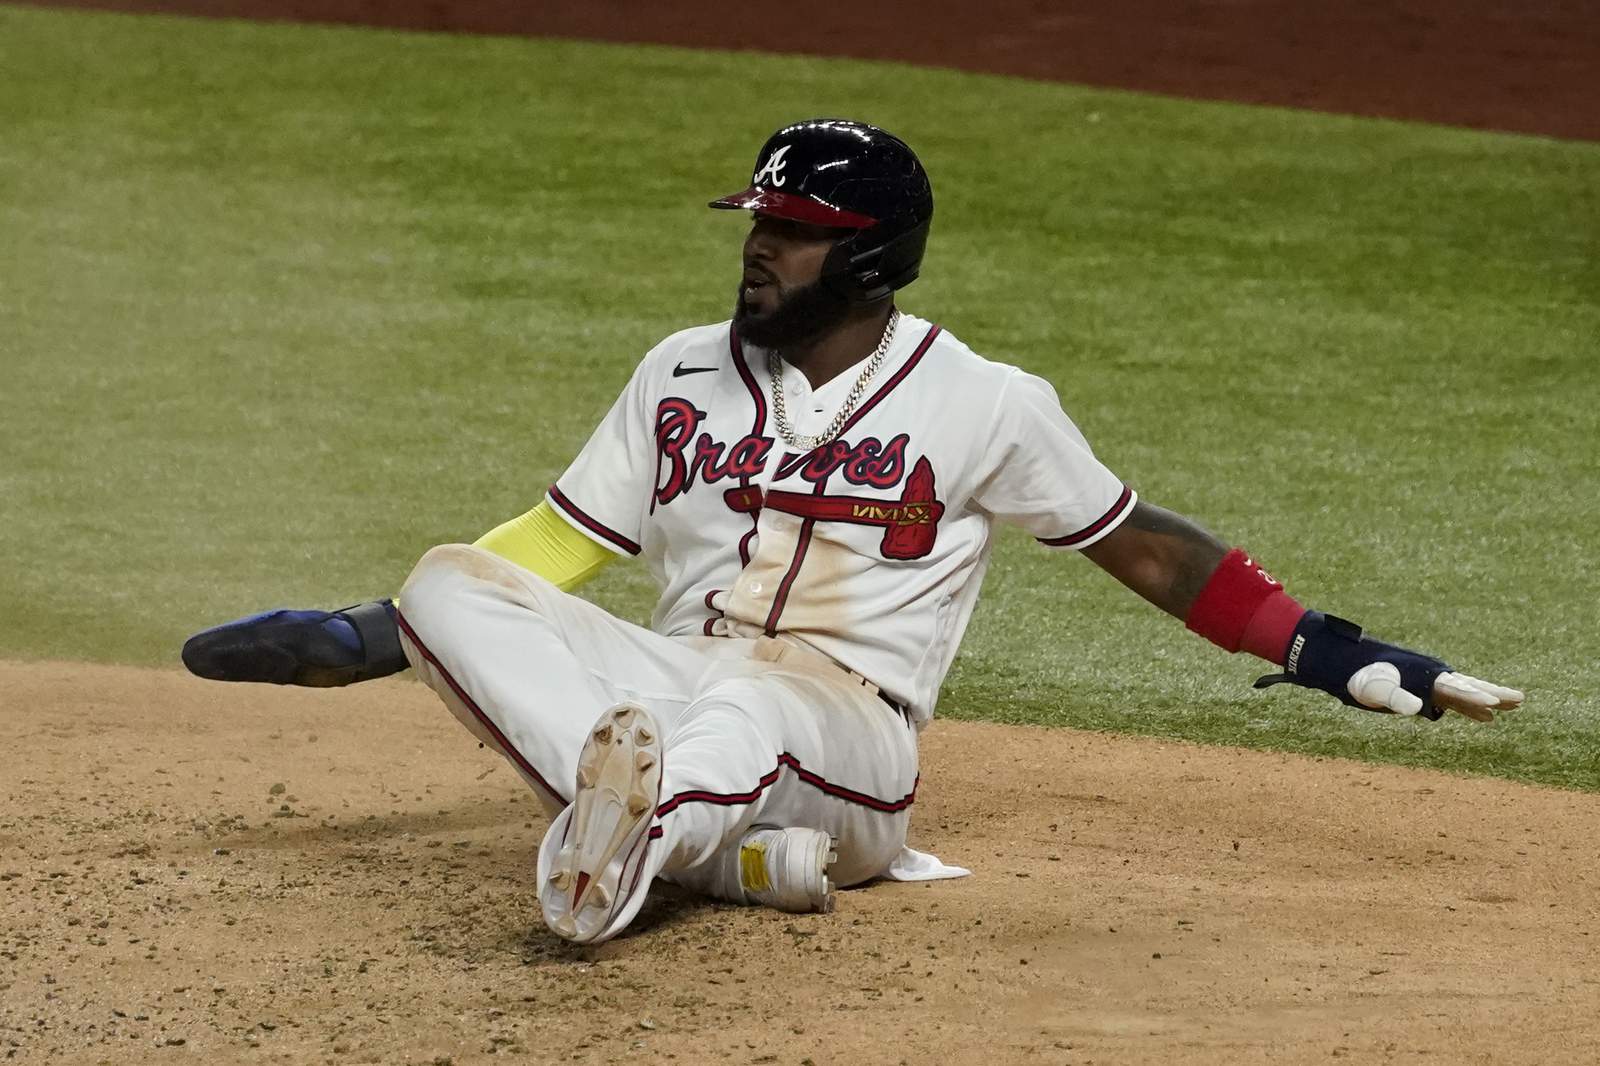 Ozuna mishap costs Braves as World Series wait continues